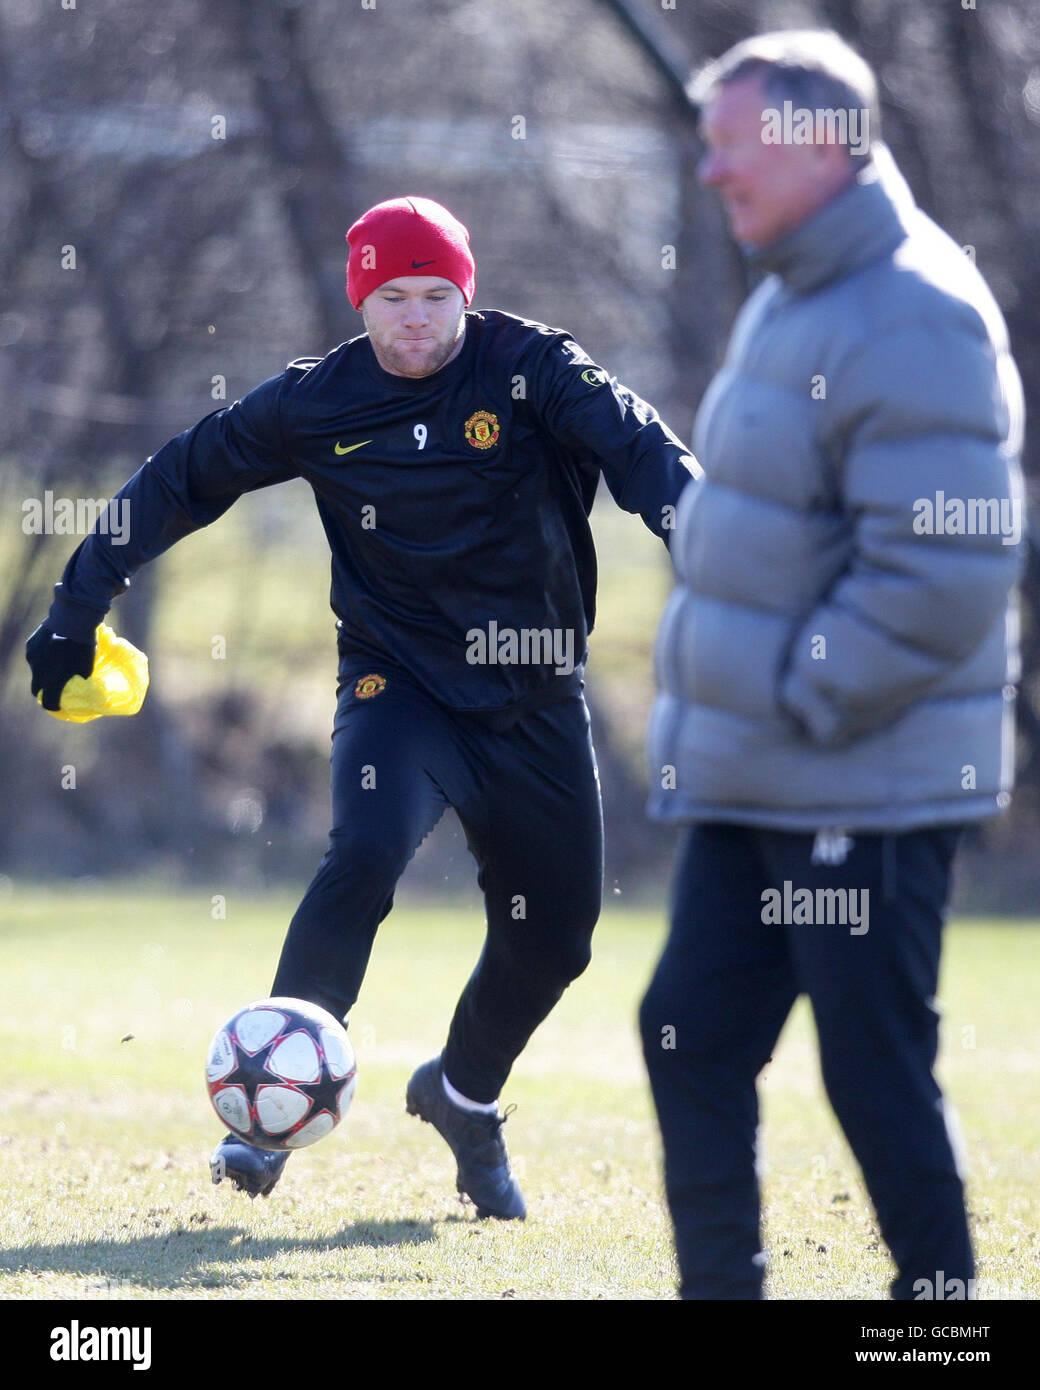 Soccer - UEFA Champions League - Round of 16 - Second Leg - Manchester United v AC Milan - Manchester United Training Session... Stock Photo